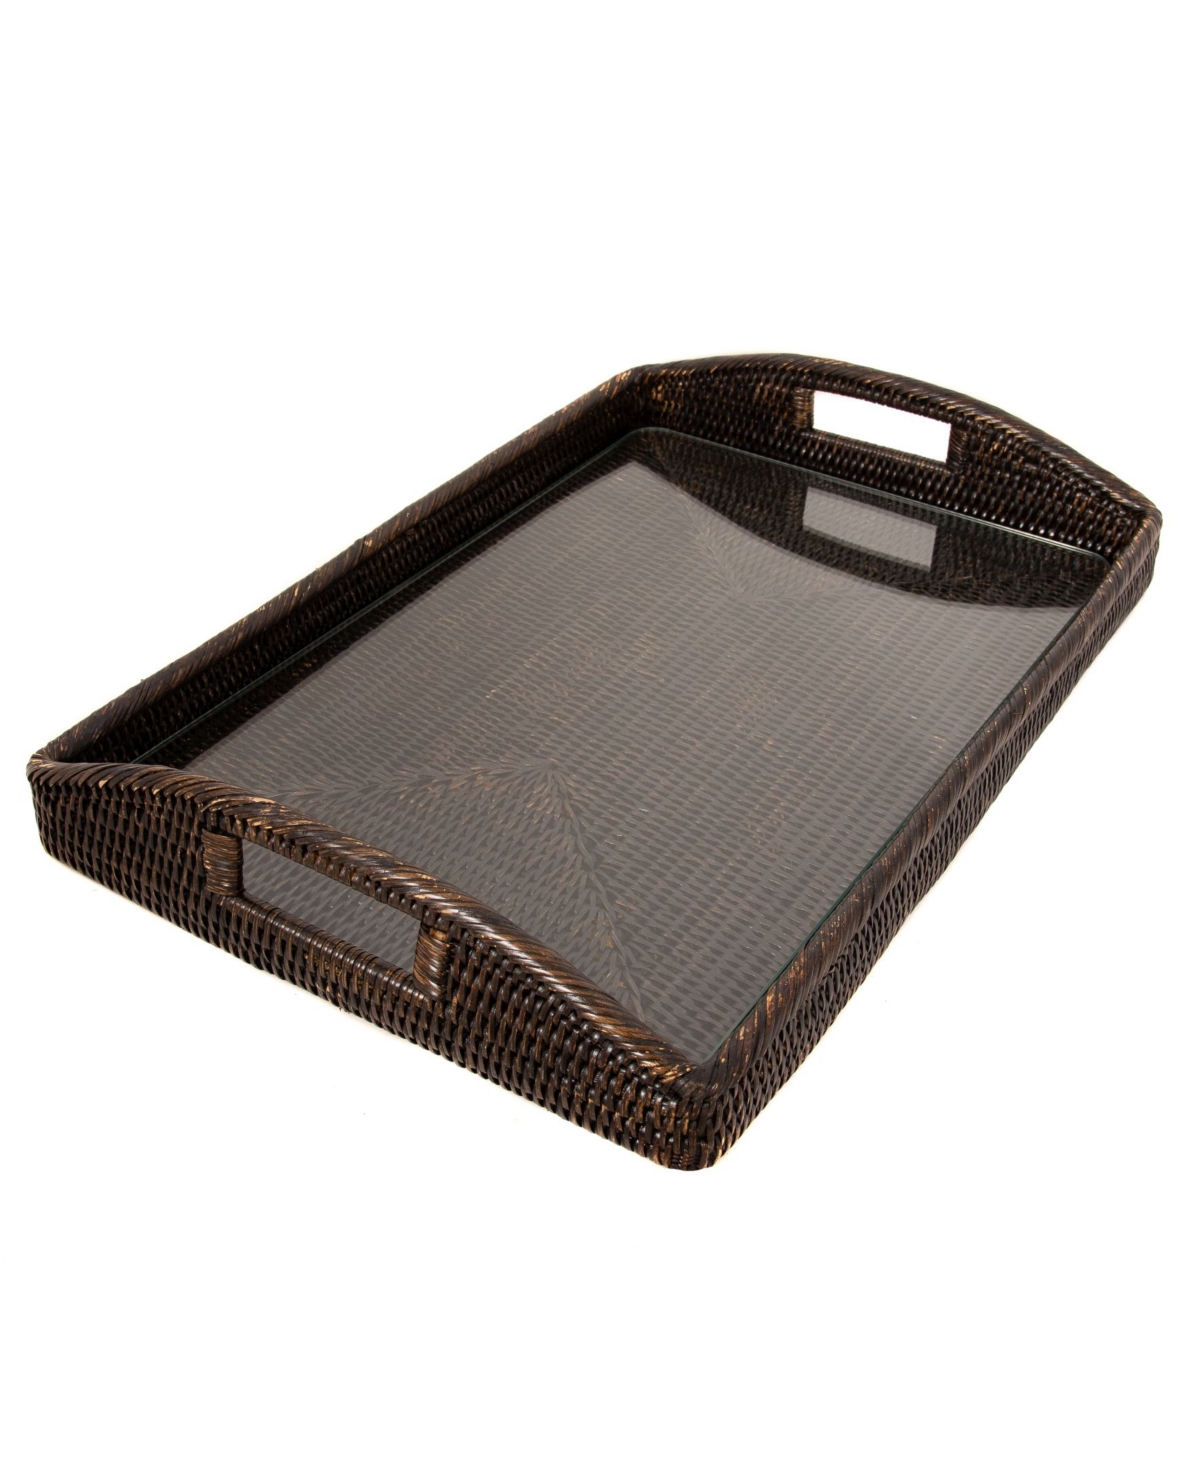 Artifacts Trading Company Artifacts Rattan 21" Rectangular Tray With Glass Insert In Dark Brown